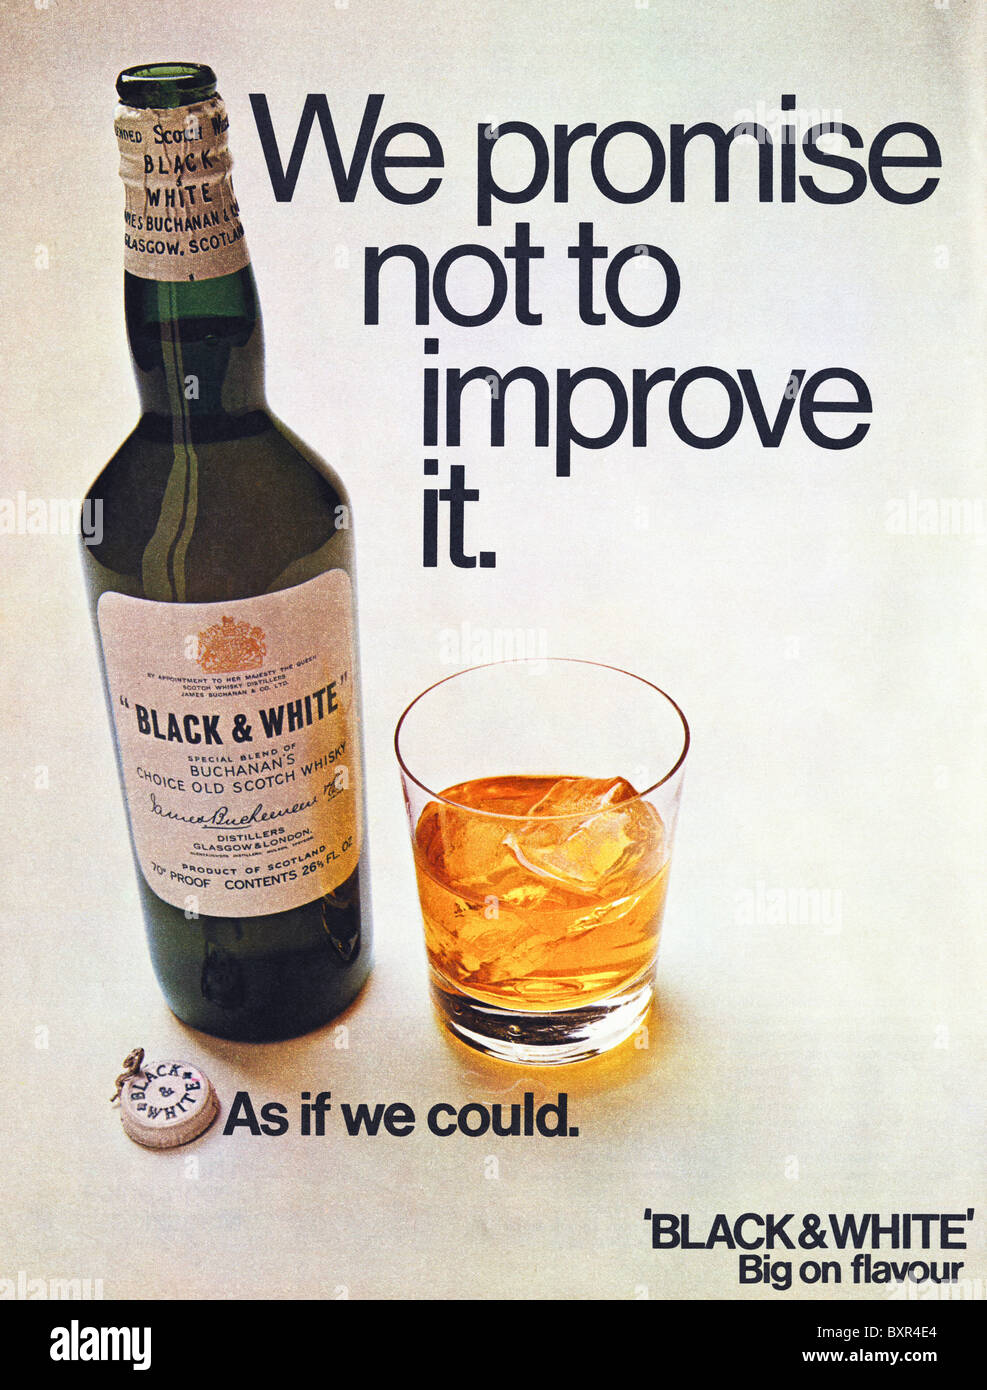 Black & White Scotch Whisky full page advertisement in magazine colour supplement circa 1969 Stock Photo